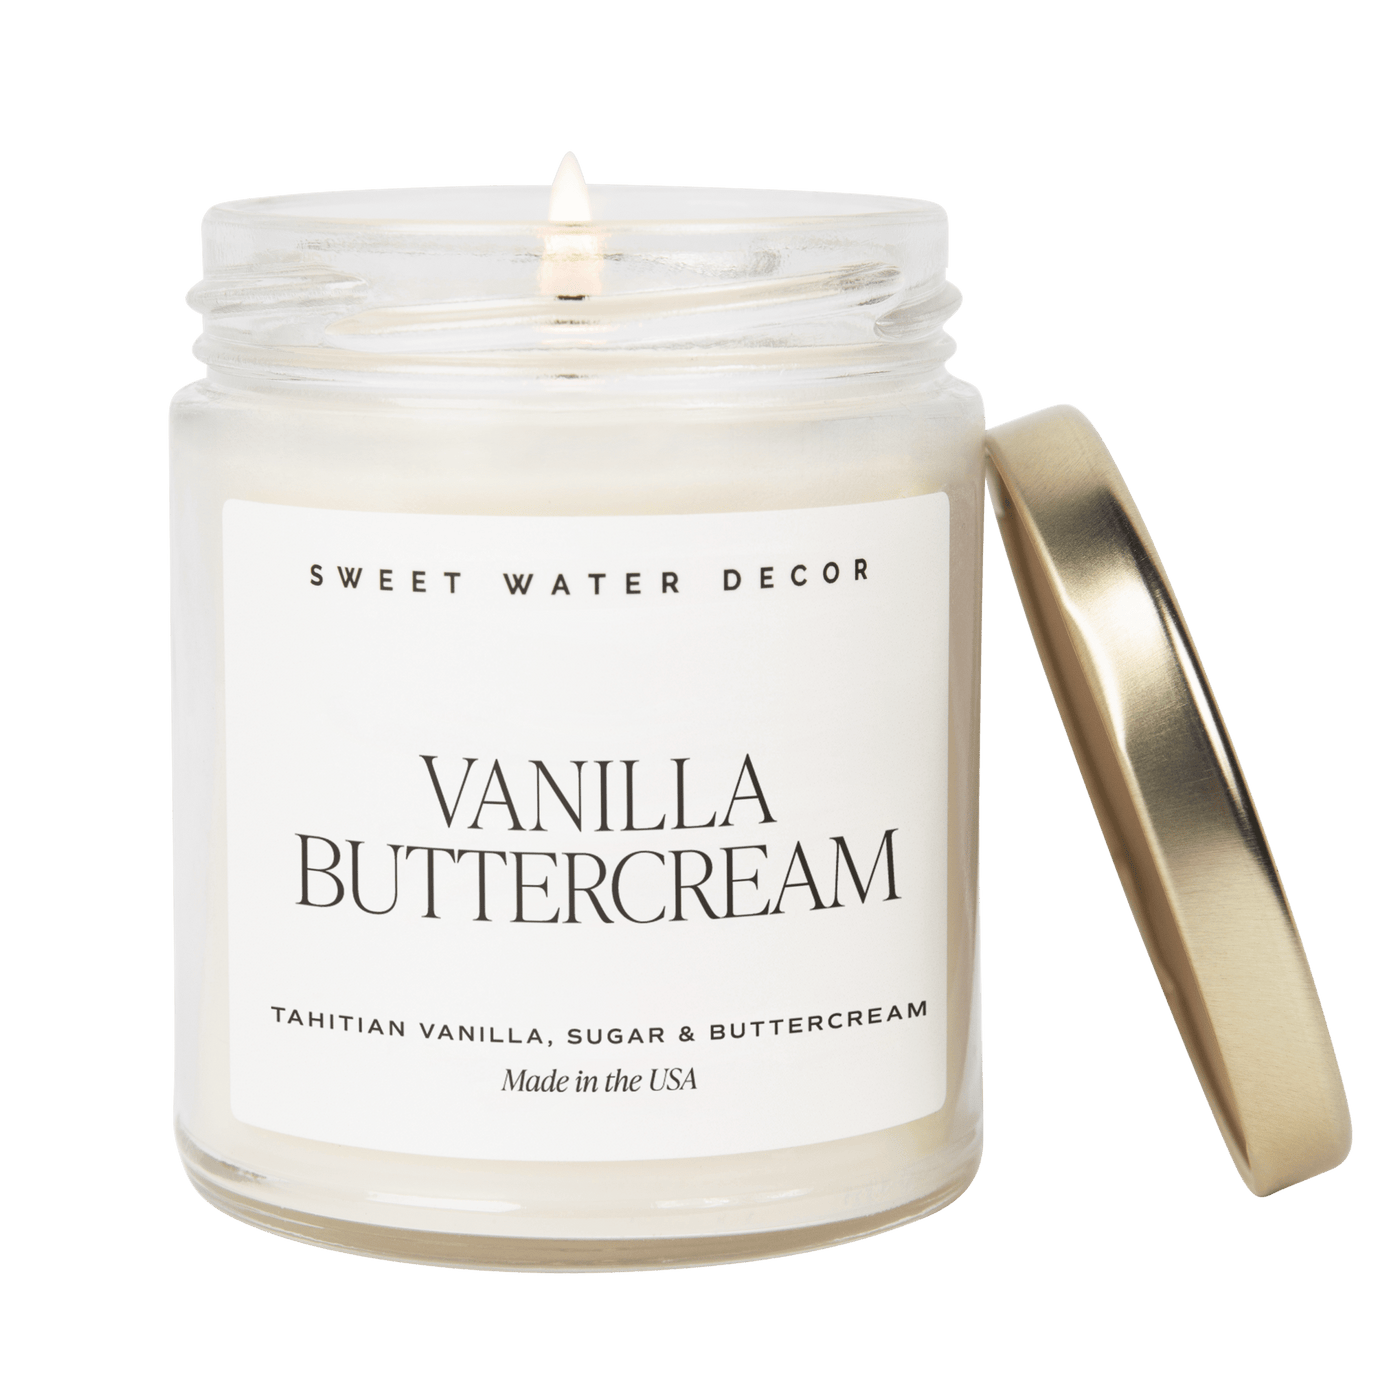 Vanilla Buttercream Soy Candle - Clear Label - 9 oz - Sweet Water Decor - Candles